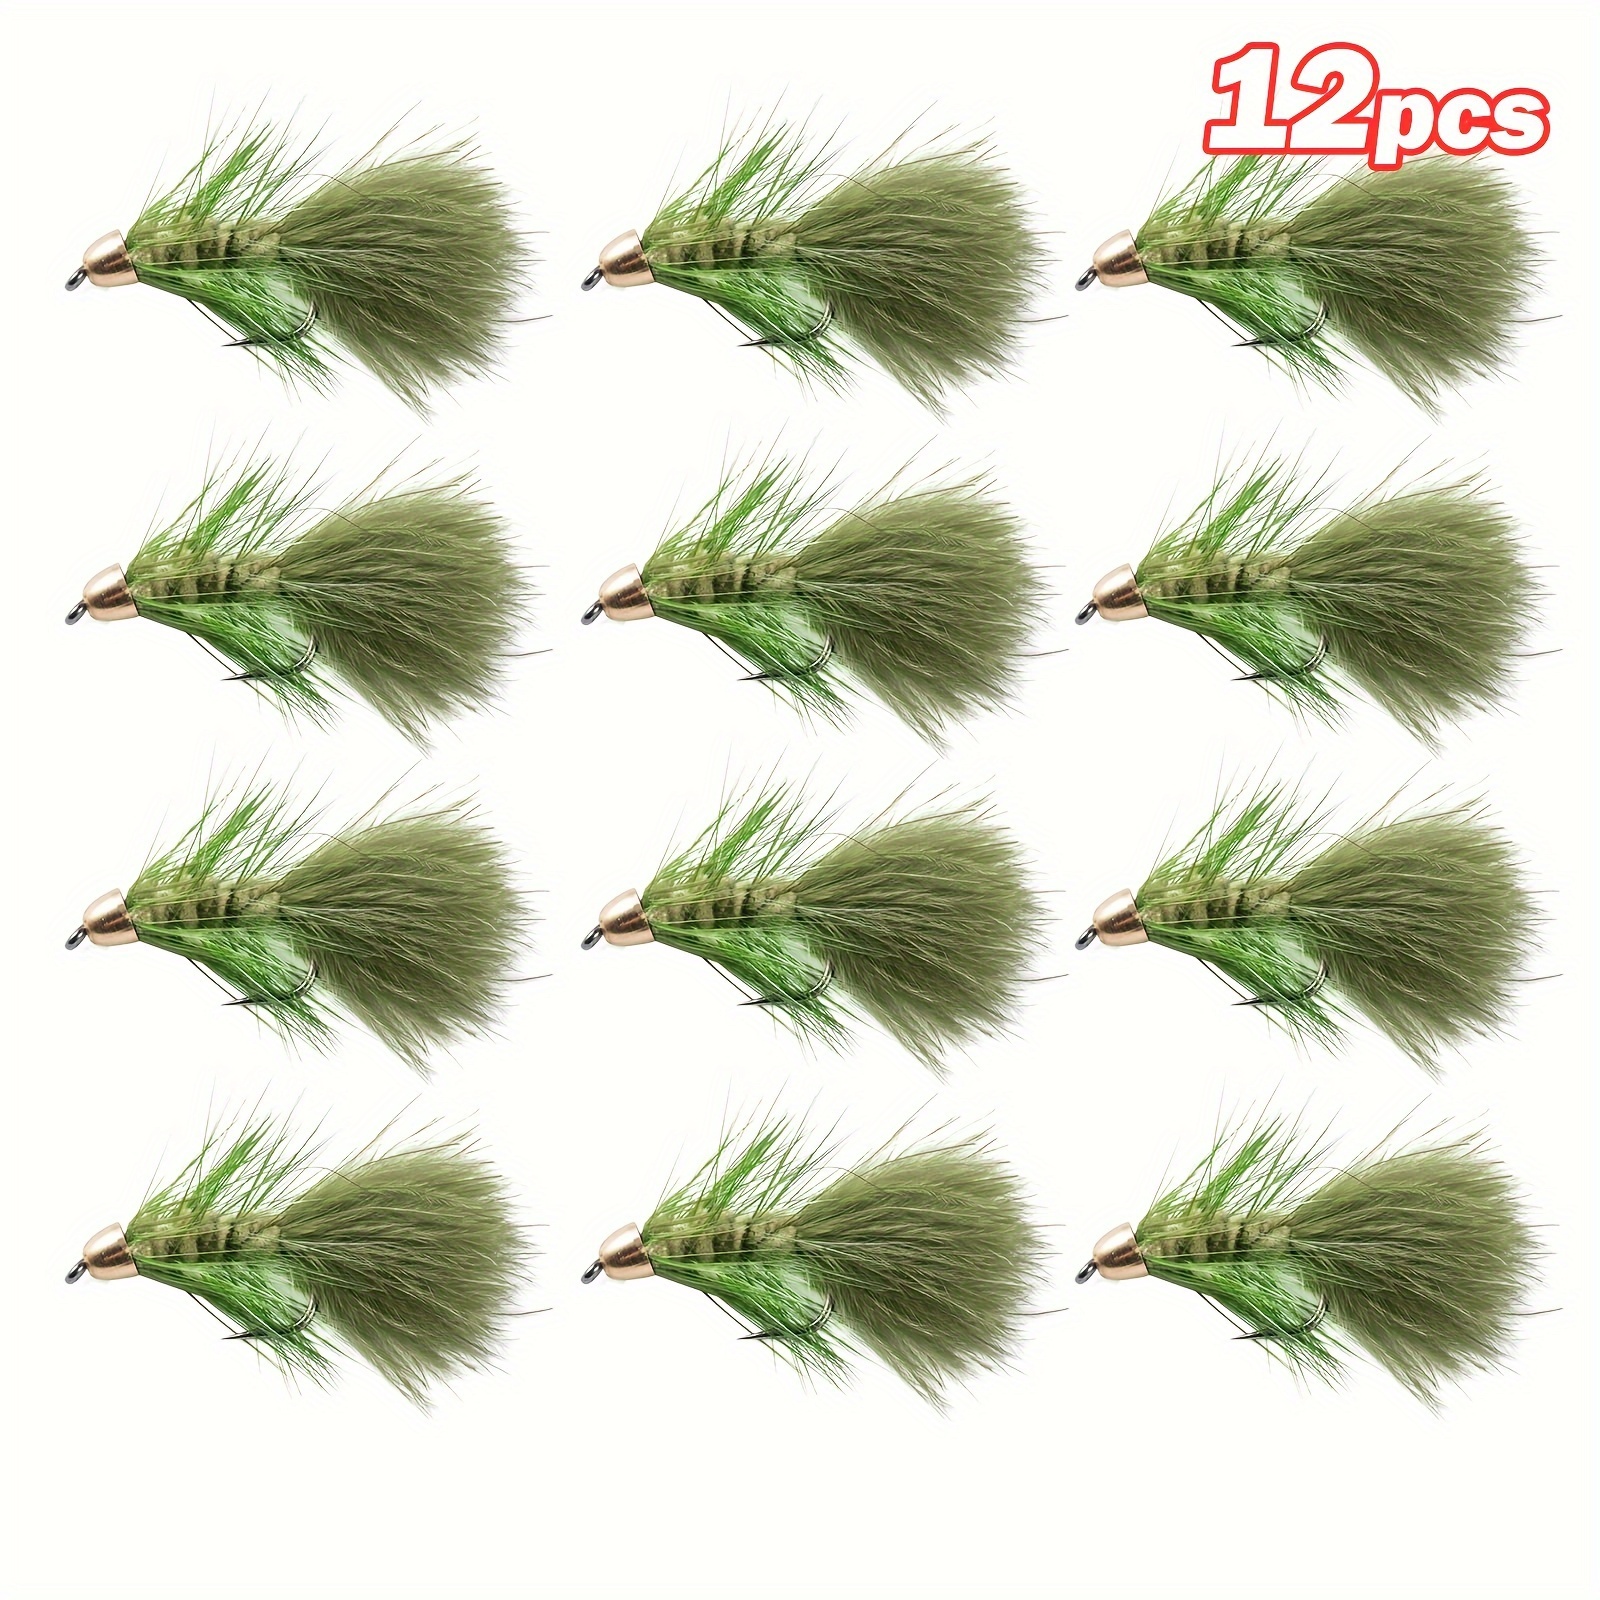 10pcs Sinking Bead Head Wooly Flies Olive Nymph Fishing Lures